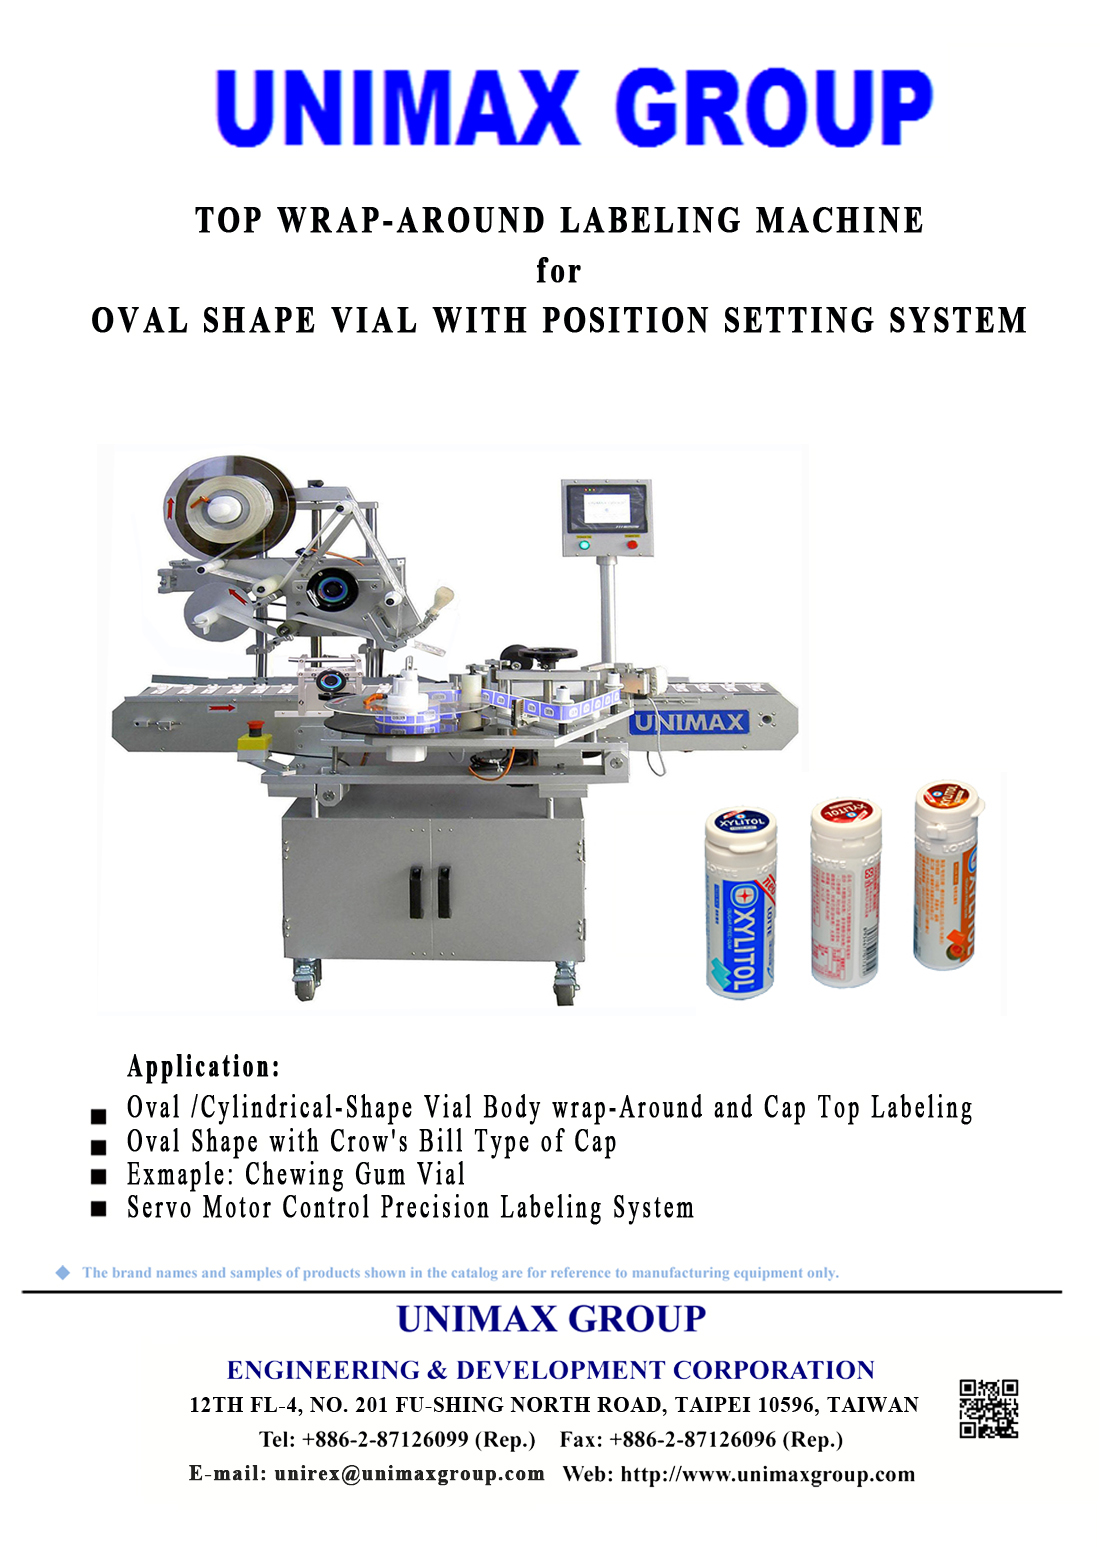 Top & Wrap-Around Labeling Machine for Oval Shape Vial with Position Setting System